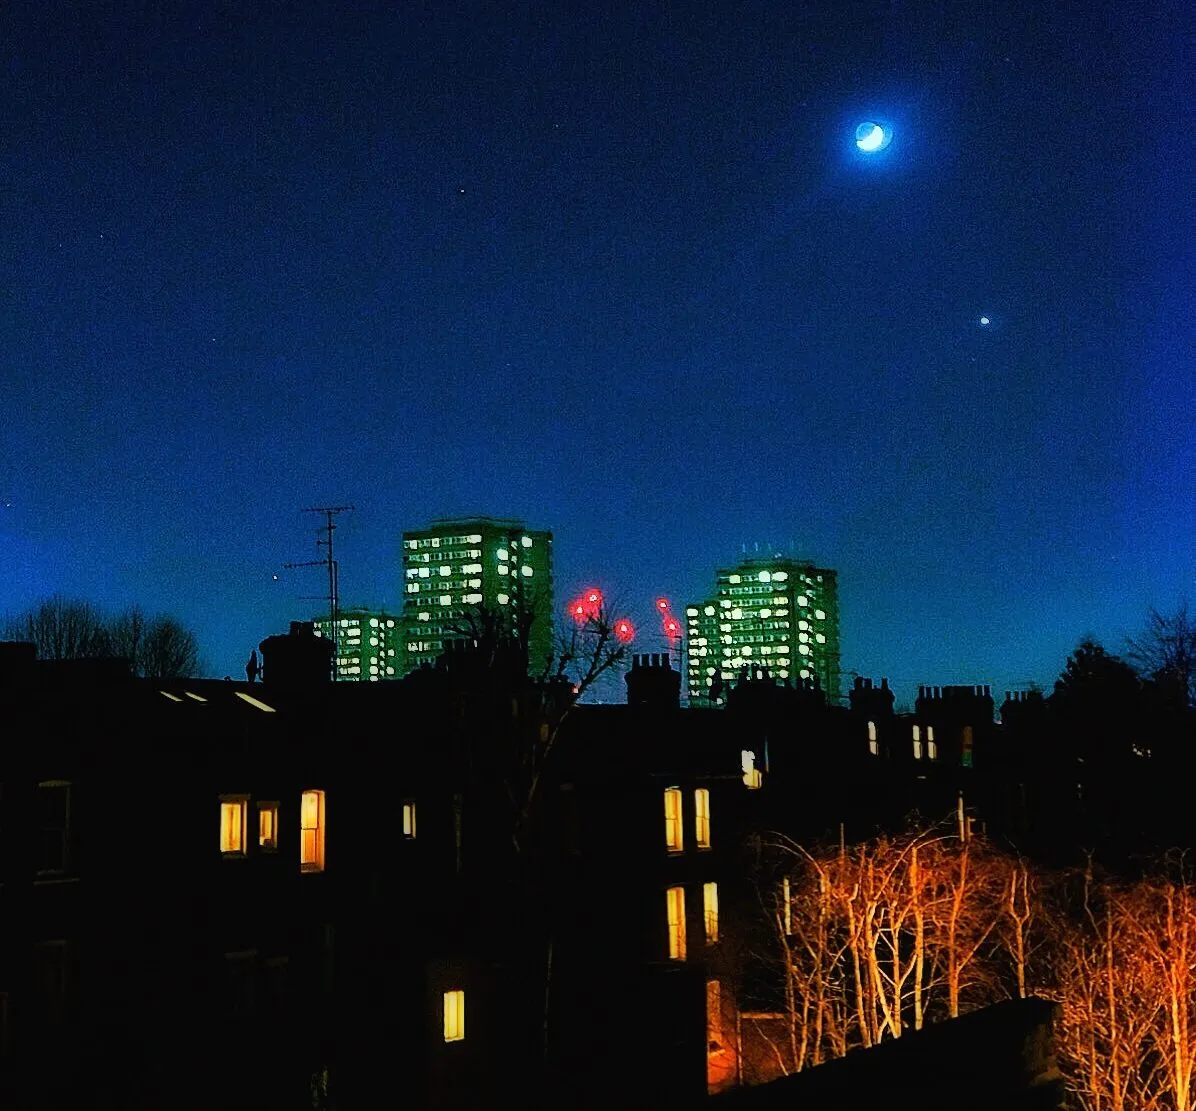 The Moon, Mars and Venus captured from London.